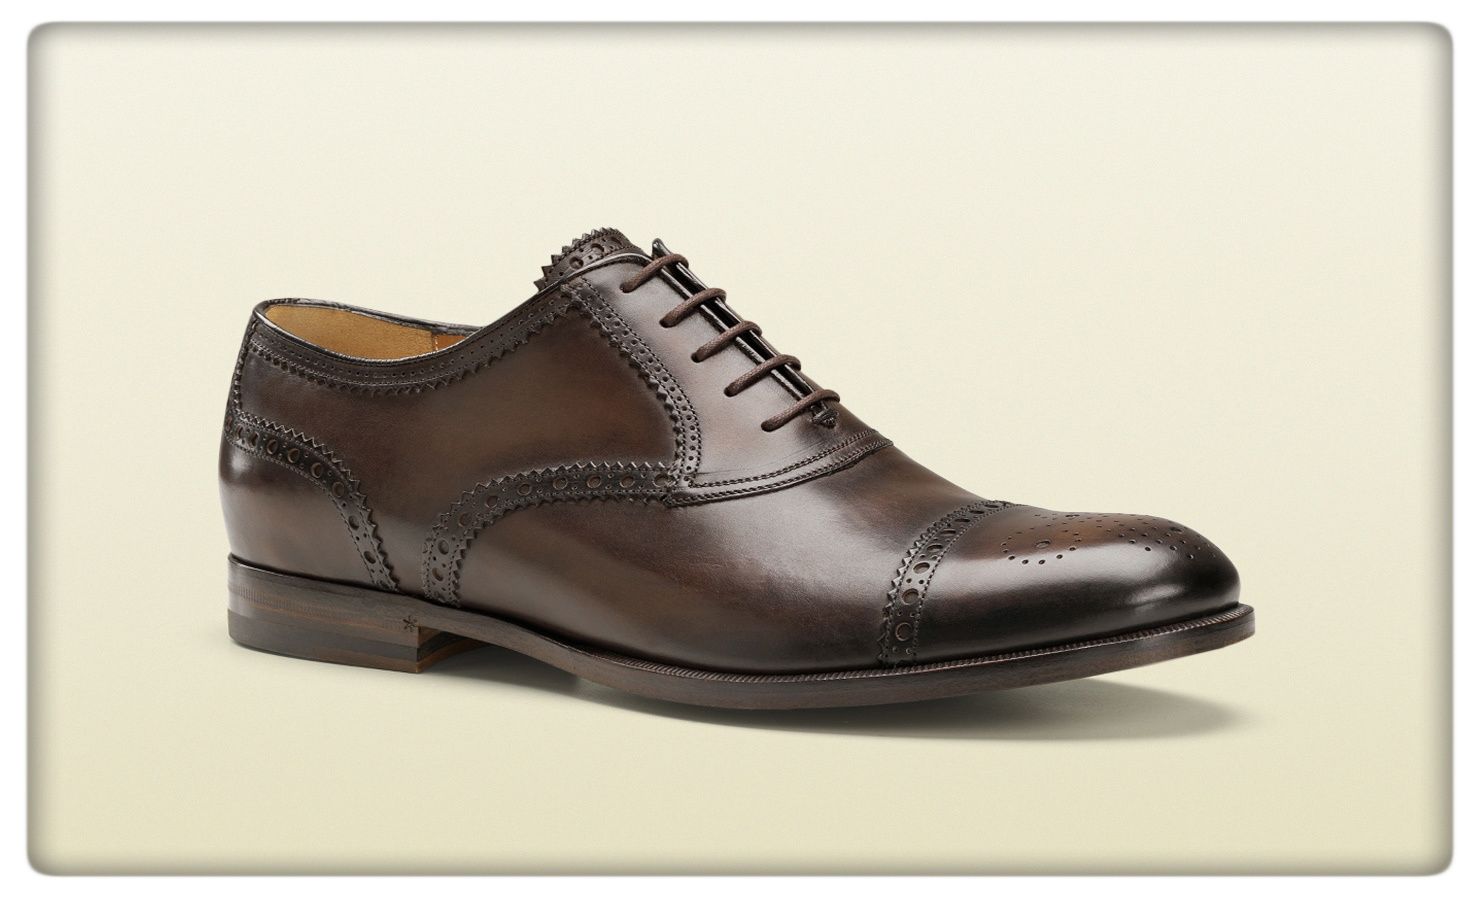 Brown leather brogue lace-up shoes from Gucci's Pre-Fall 2012 collection (Photo courtesy | Gucci)